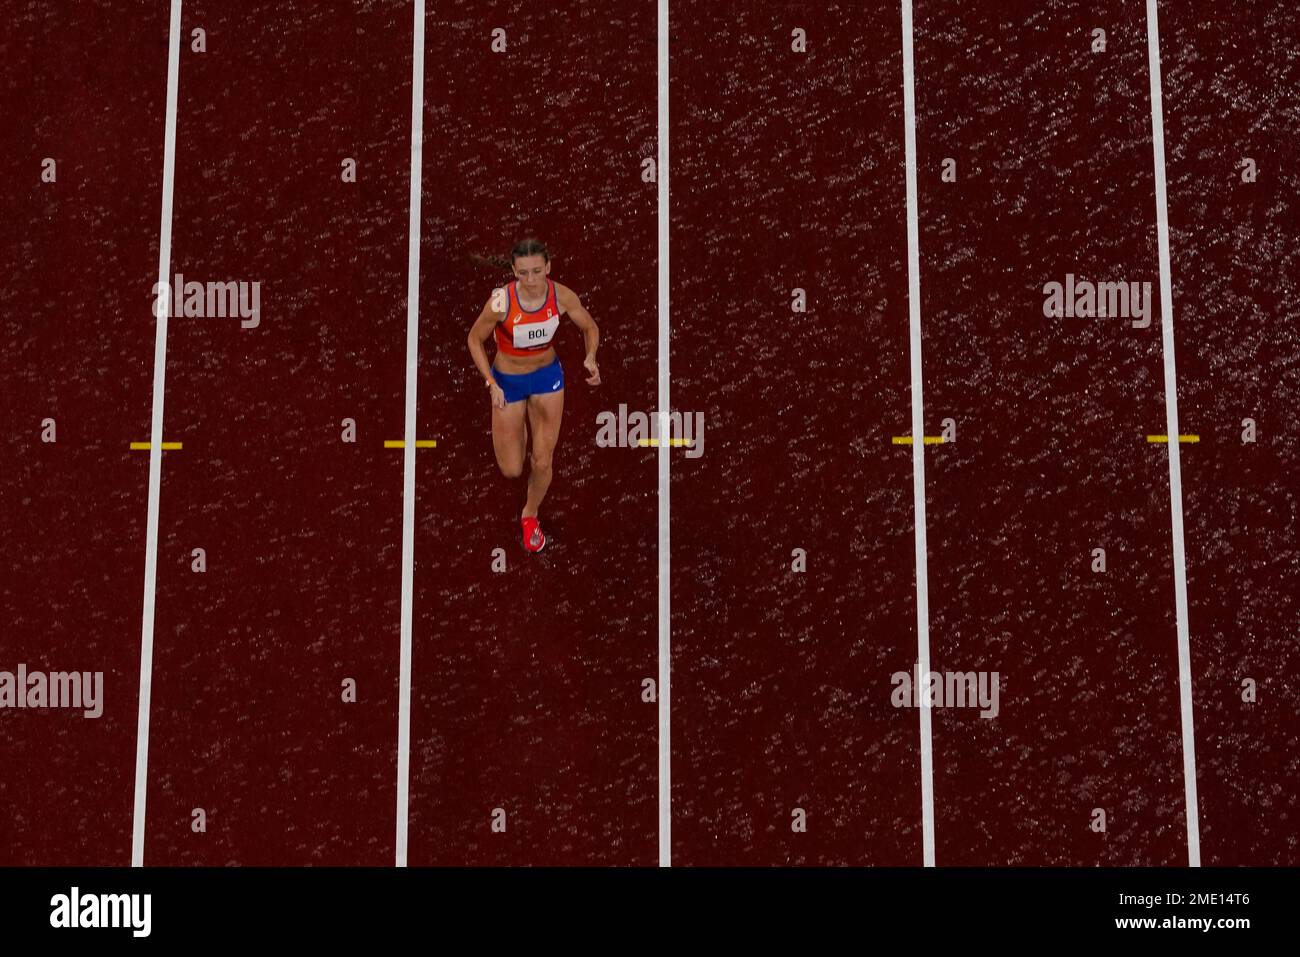 Femke Bol Of Netherlands Wins Her Heat During The Semifinals Of The Womens 400 Meter Hurdles 